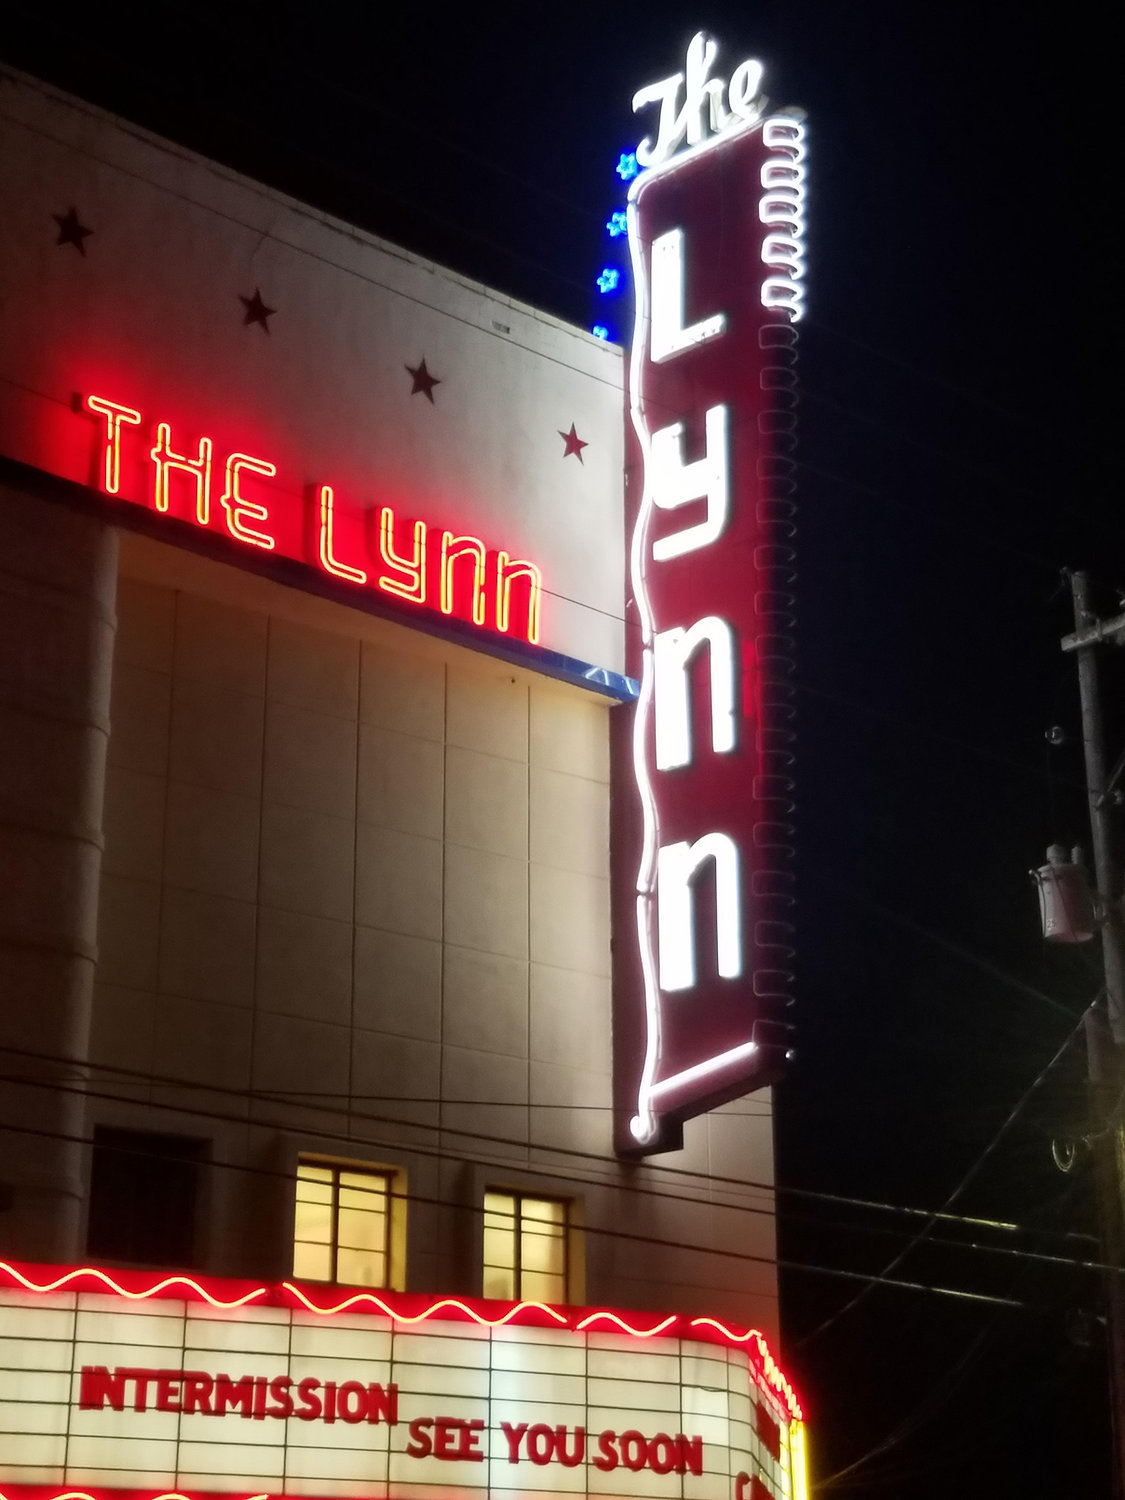 The Lynn Theater’s iconic sign is a reminder to downtown Gonzales that business isn’t closing, they’re just in intermission. The Lynn is one of many businesses have to change their strategies to stay afloat during the COVID-19 pandemic.